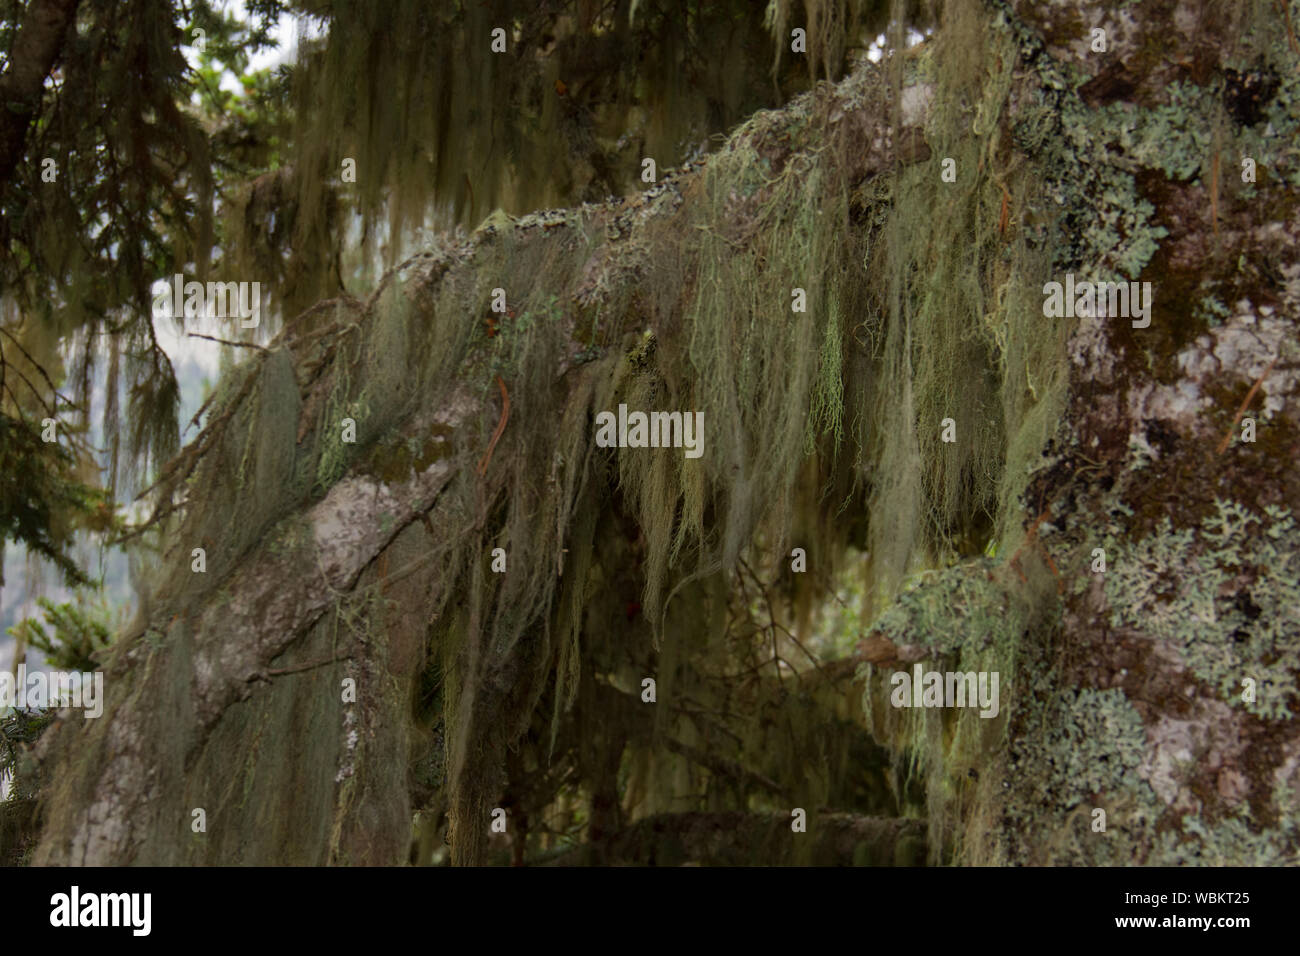 Beard lichens, also known as old man’s beard, on old pine trees Stock Photo